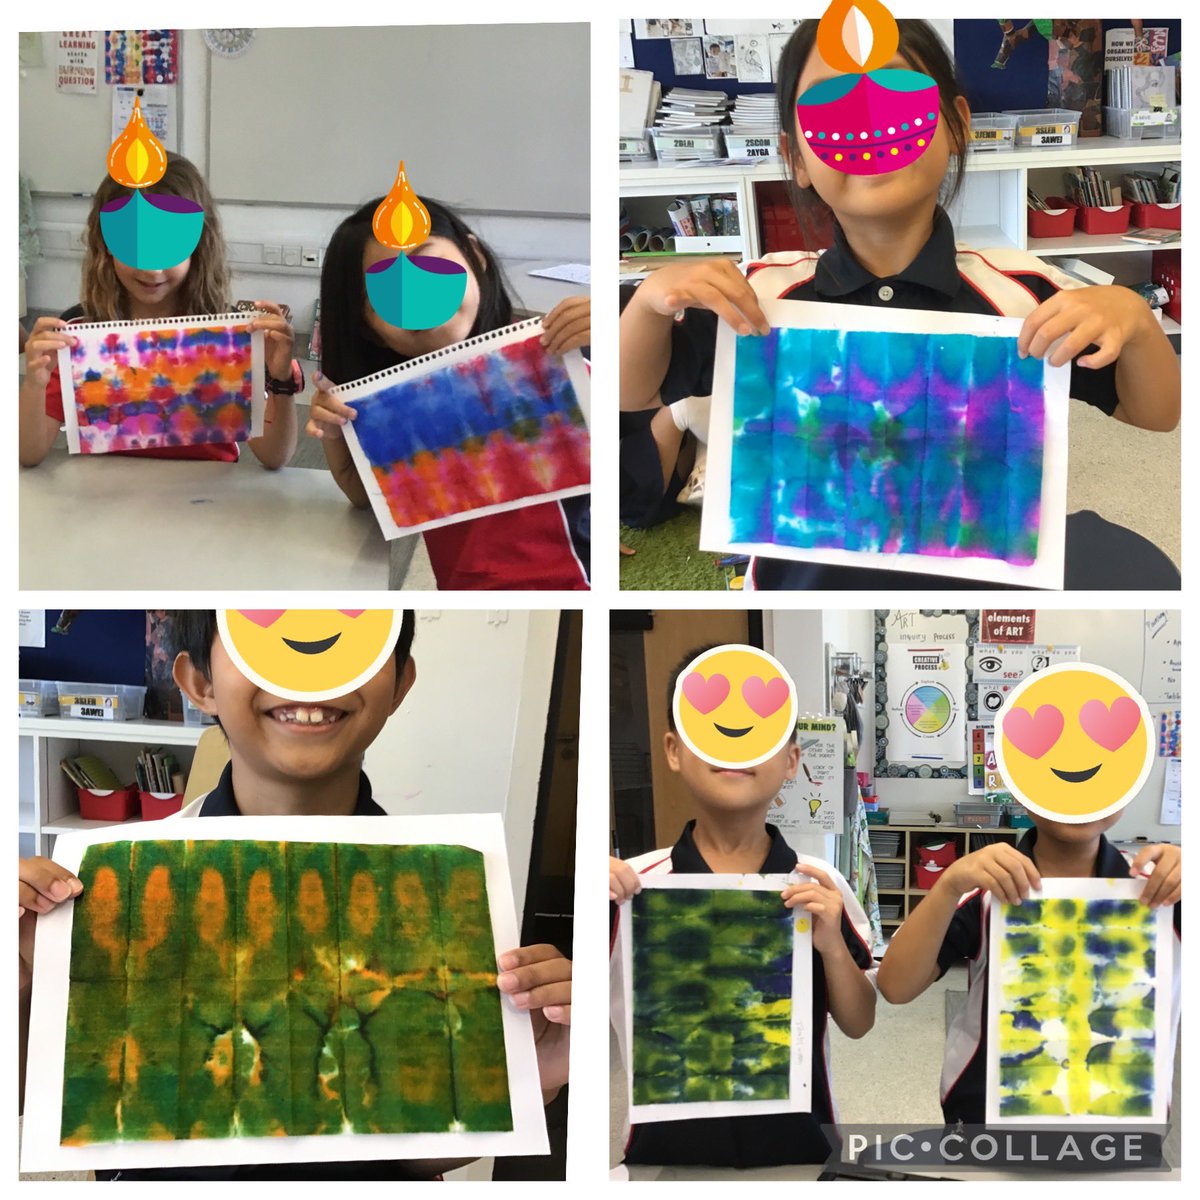 Tie & Dye techniques are one of the ancient methods use to add color to fabric. Inspired by the sari I am wearing, which adopted a Japanese shibori dyeing method, my g3 Ss attempted the tie & dye technique with some stunning results #deepavali celebrations at #saisrocks